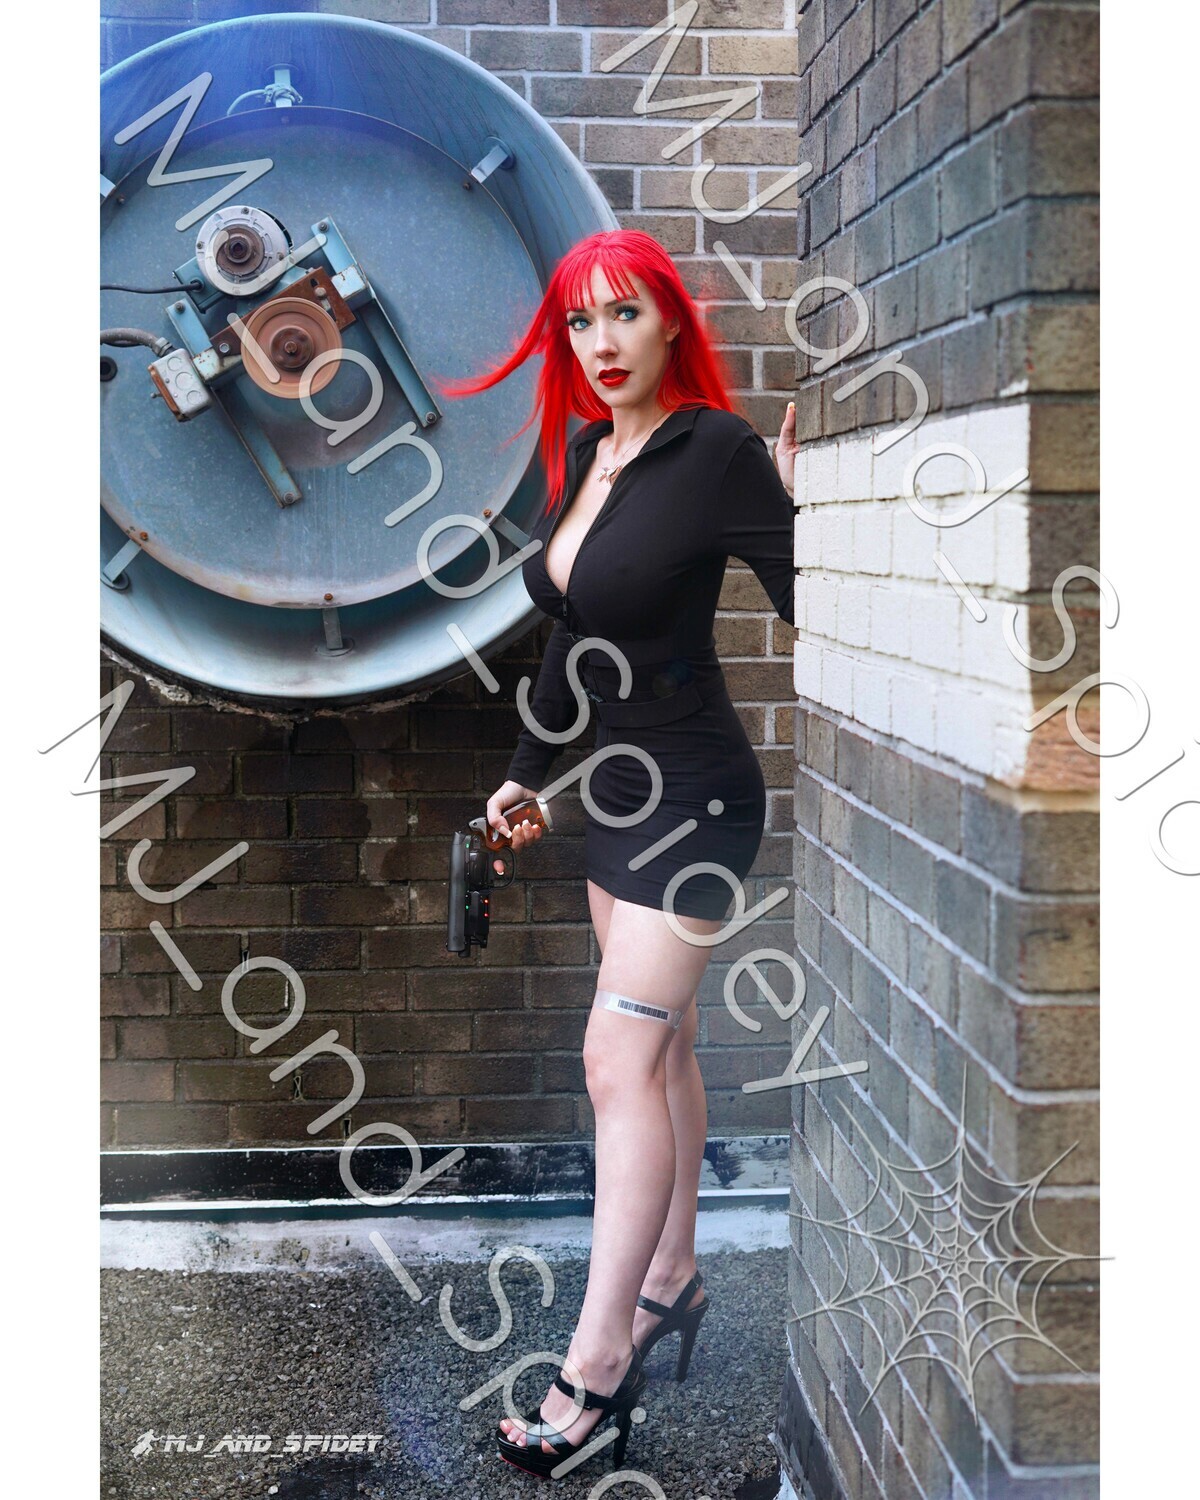 Cyberpunk - Mary Jane Watson - Replicant - No. 1 - Digital Cosplay Image (@MJ_and_Spidey, Sci Fi, Science Fiction, Blade Runner)